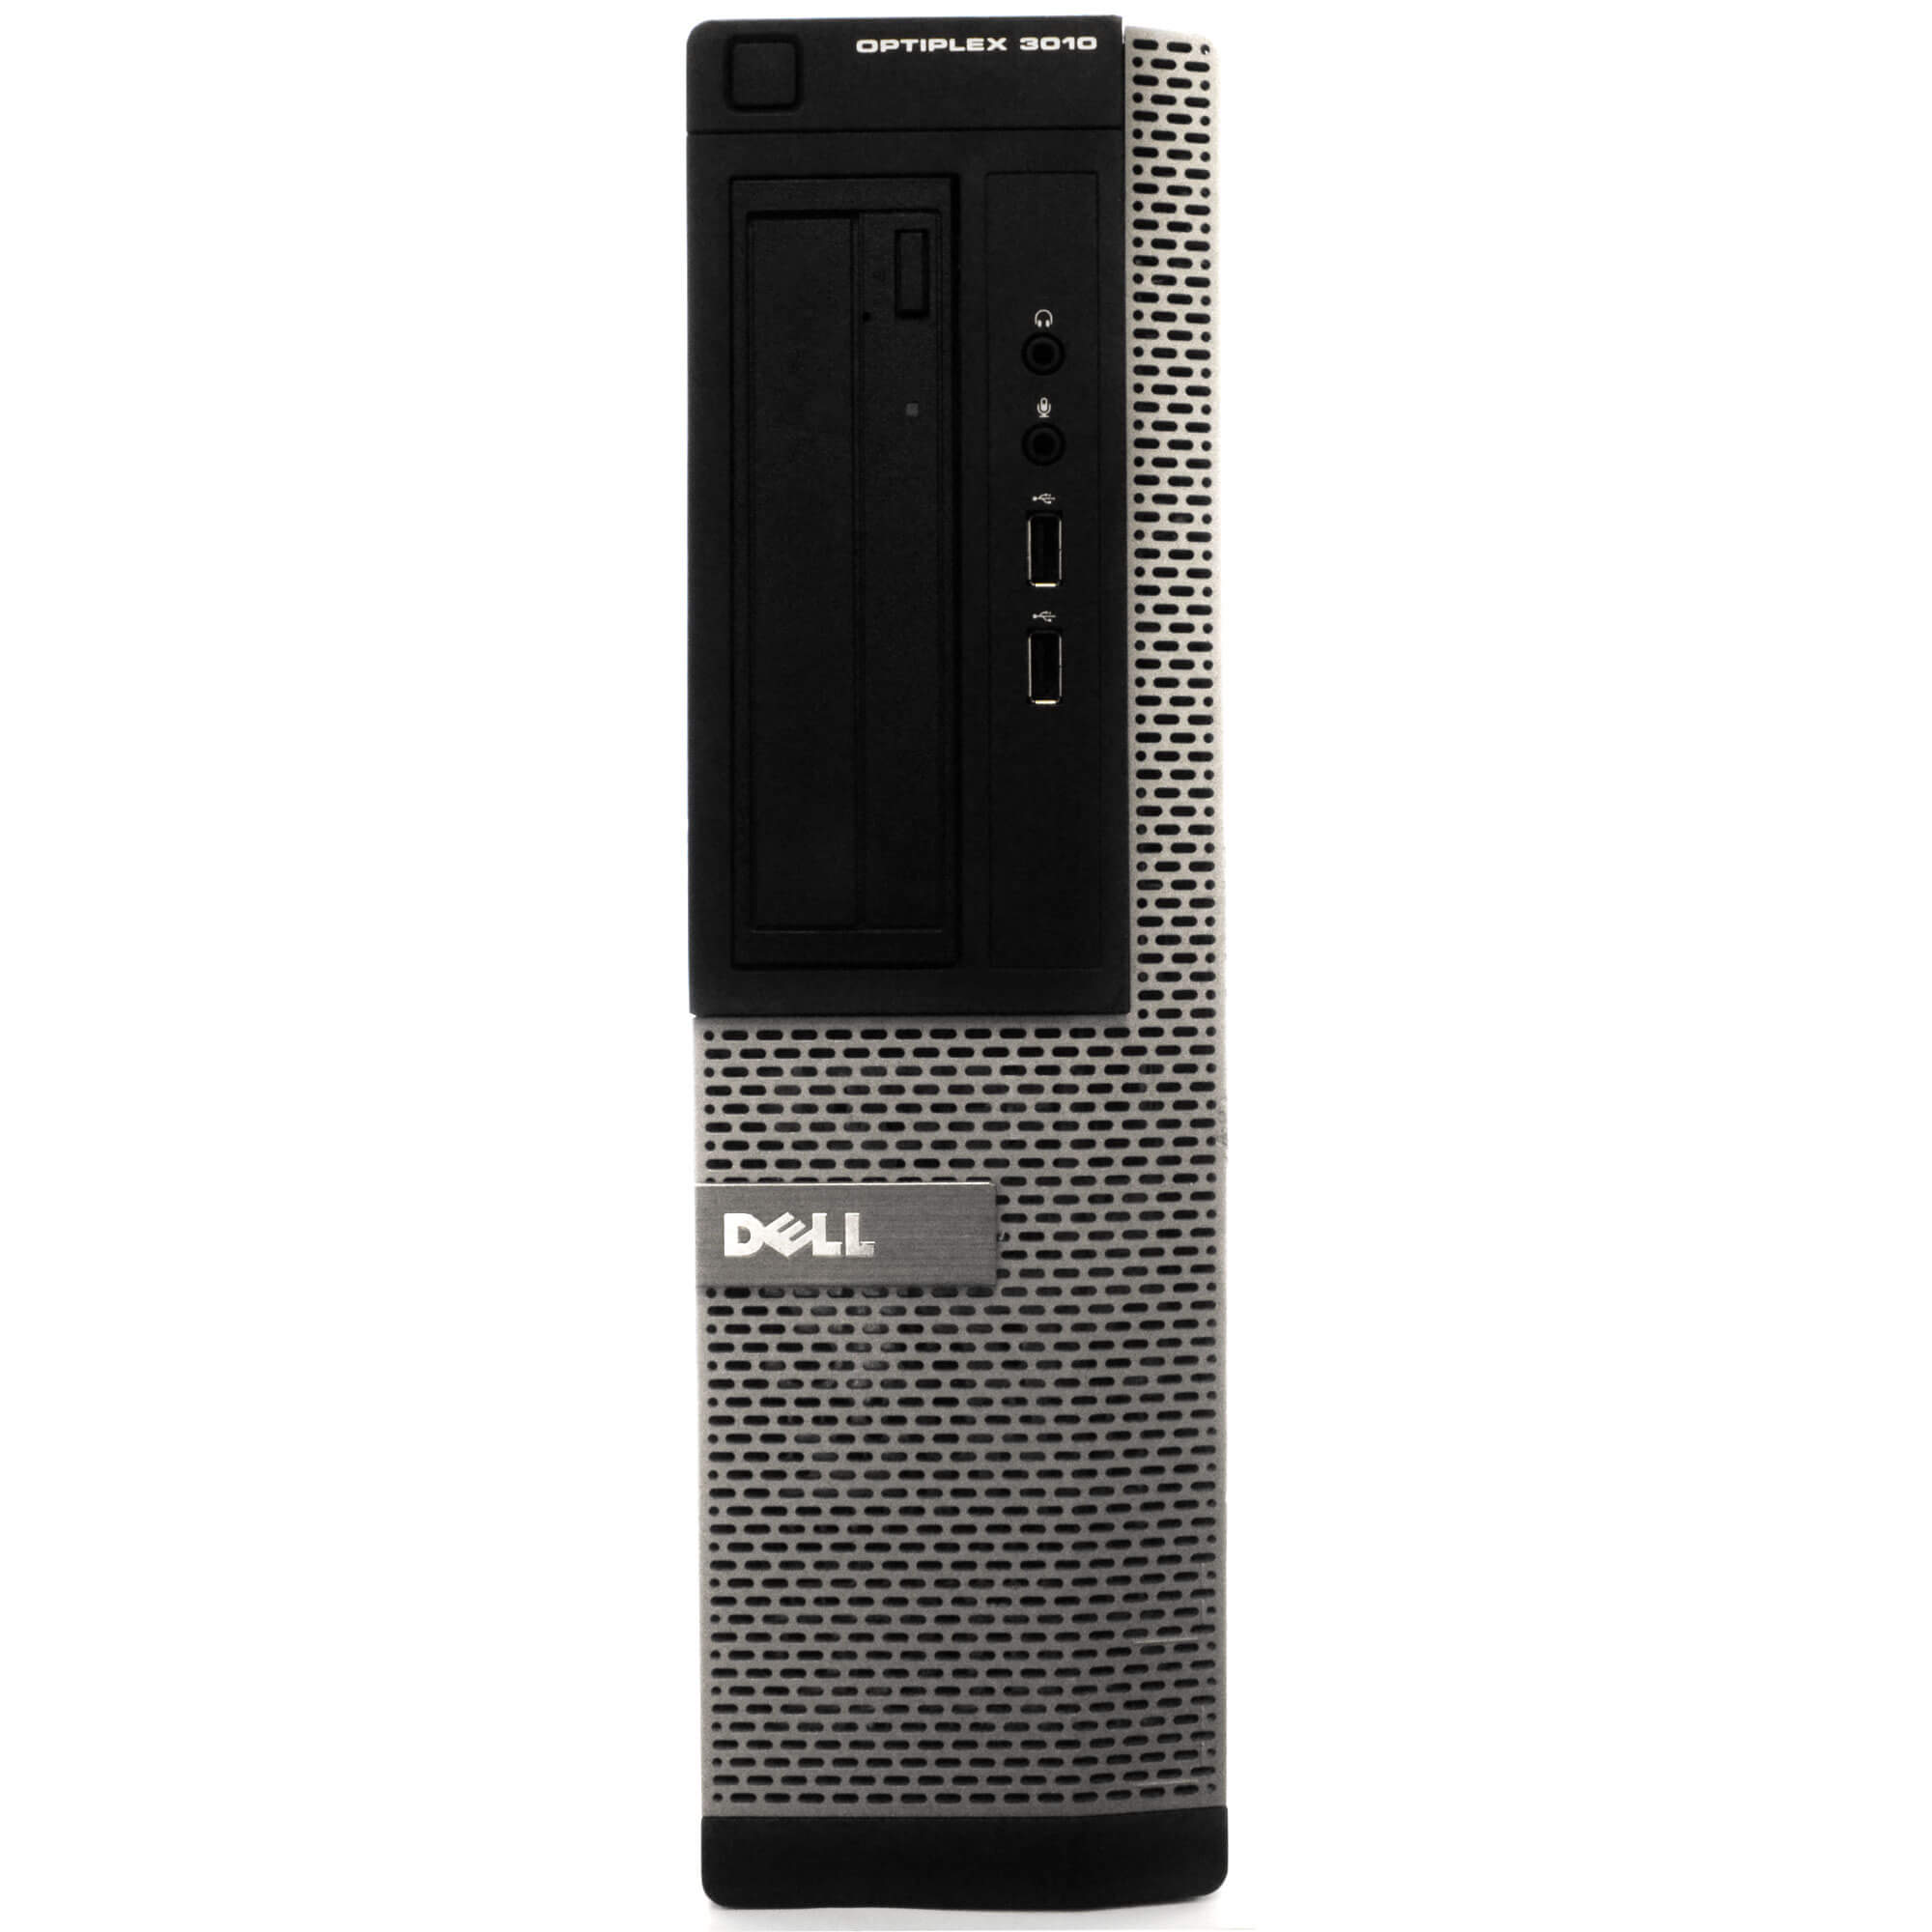 DELL Optiplex 3010 Desktop Computer PC, Intel Quad-Core i5, 120GB SSD, 8GB DDR3 RAM, Windows 10 Home, DVD, WIFI, USB Keyboard and Mouse (Used - Like New) - image 1 of 7